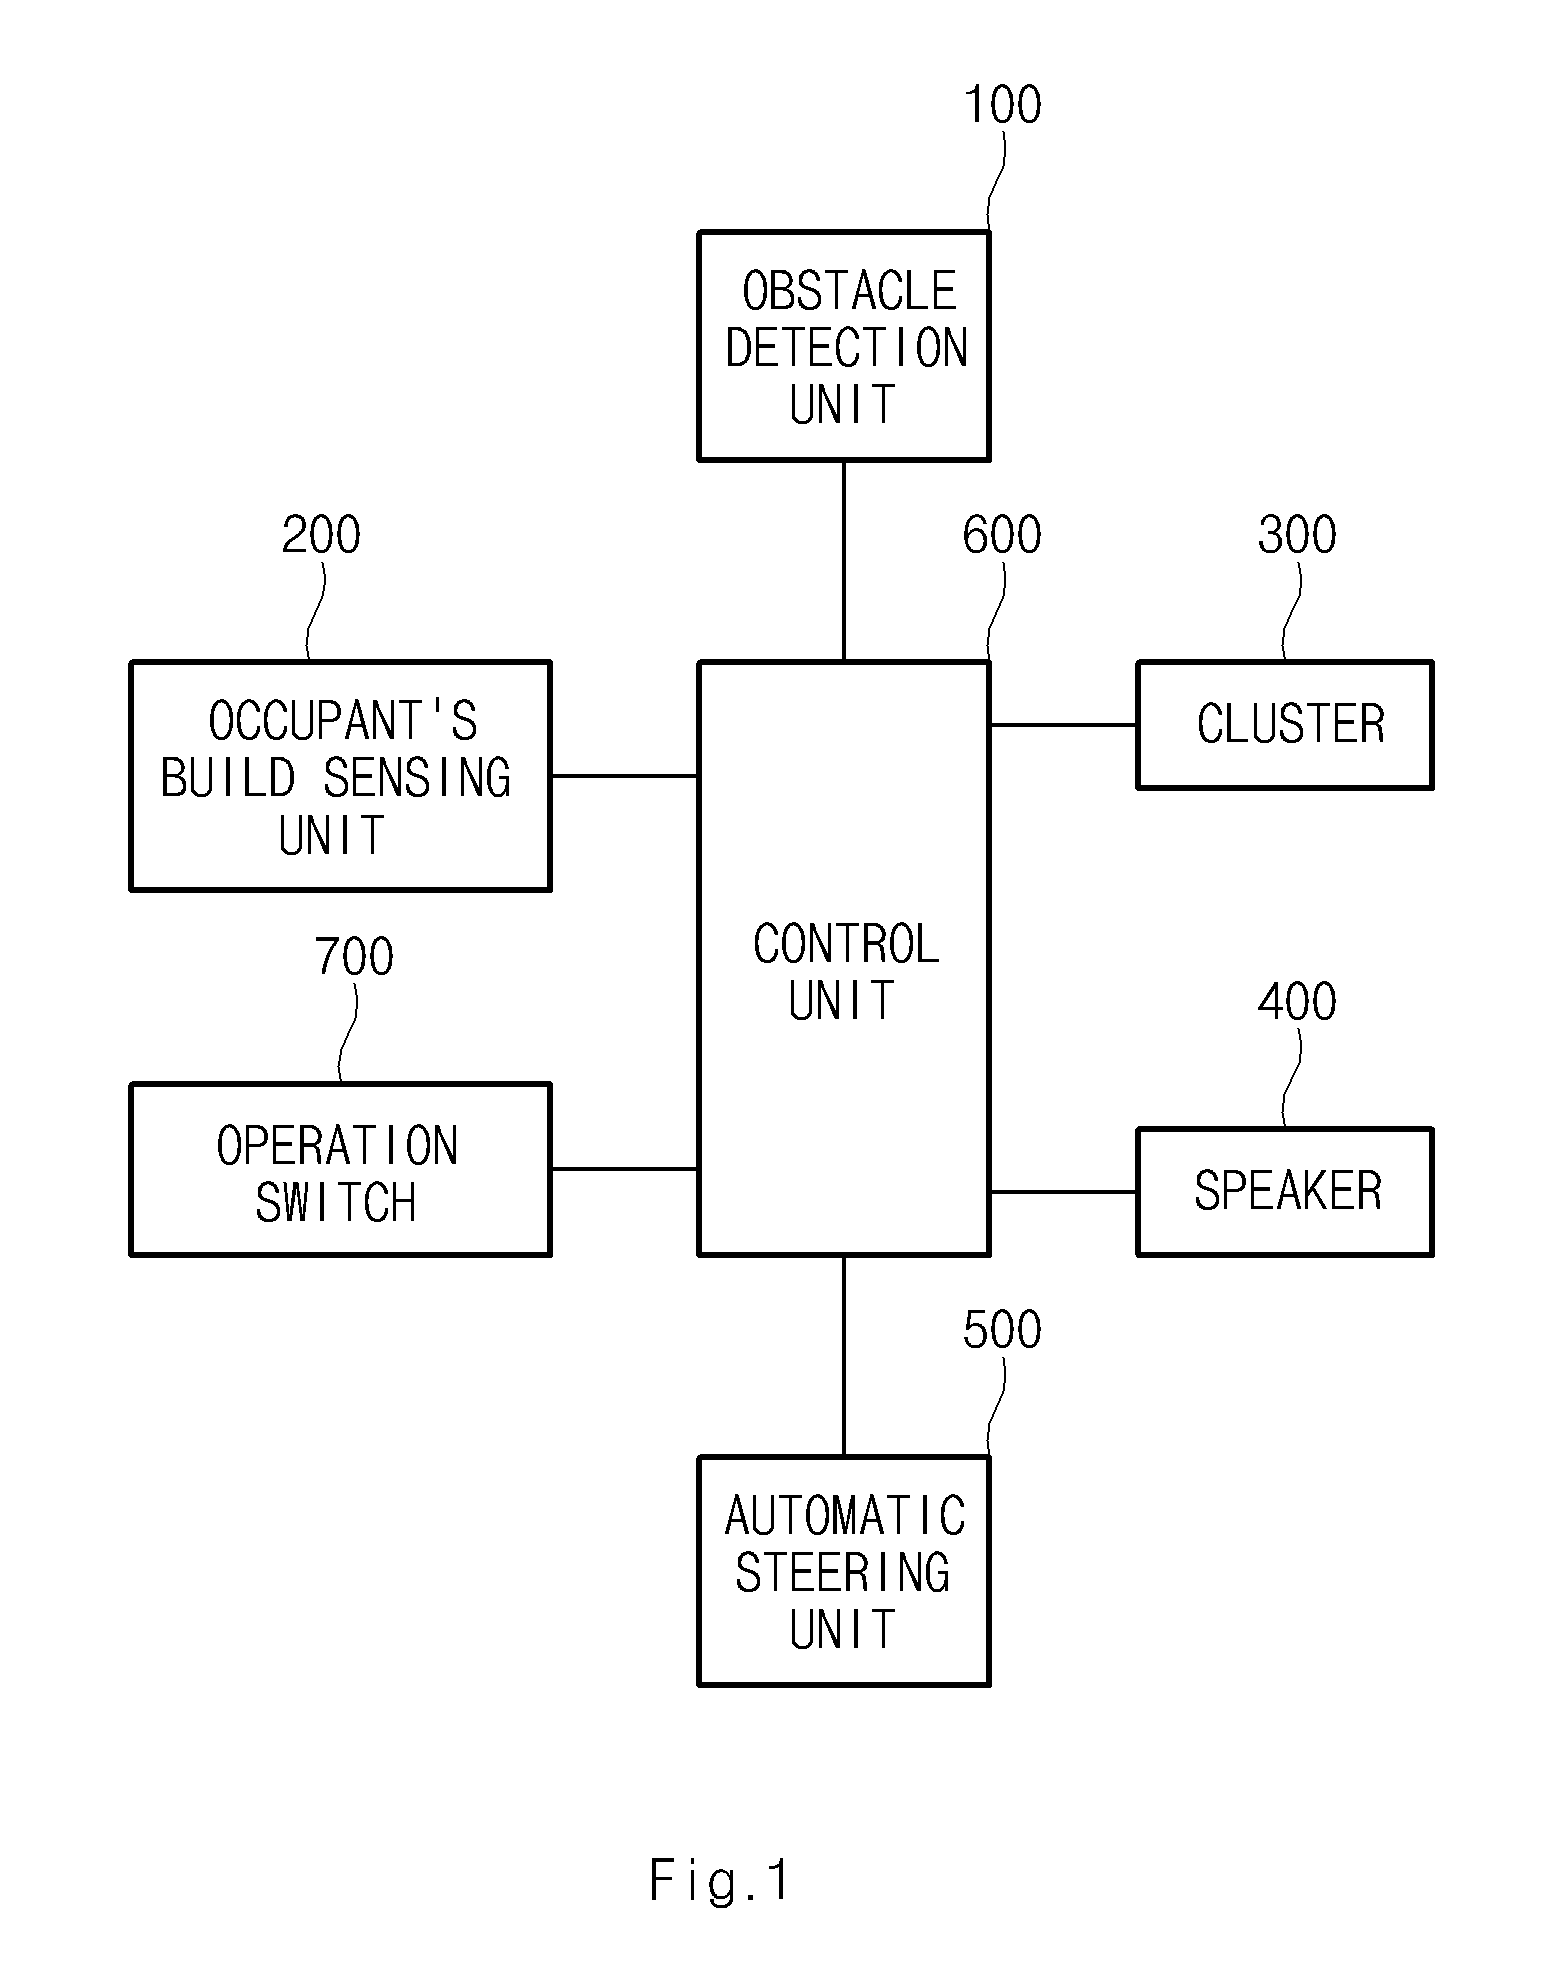 Parking assist system and method for varying parking area